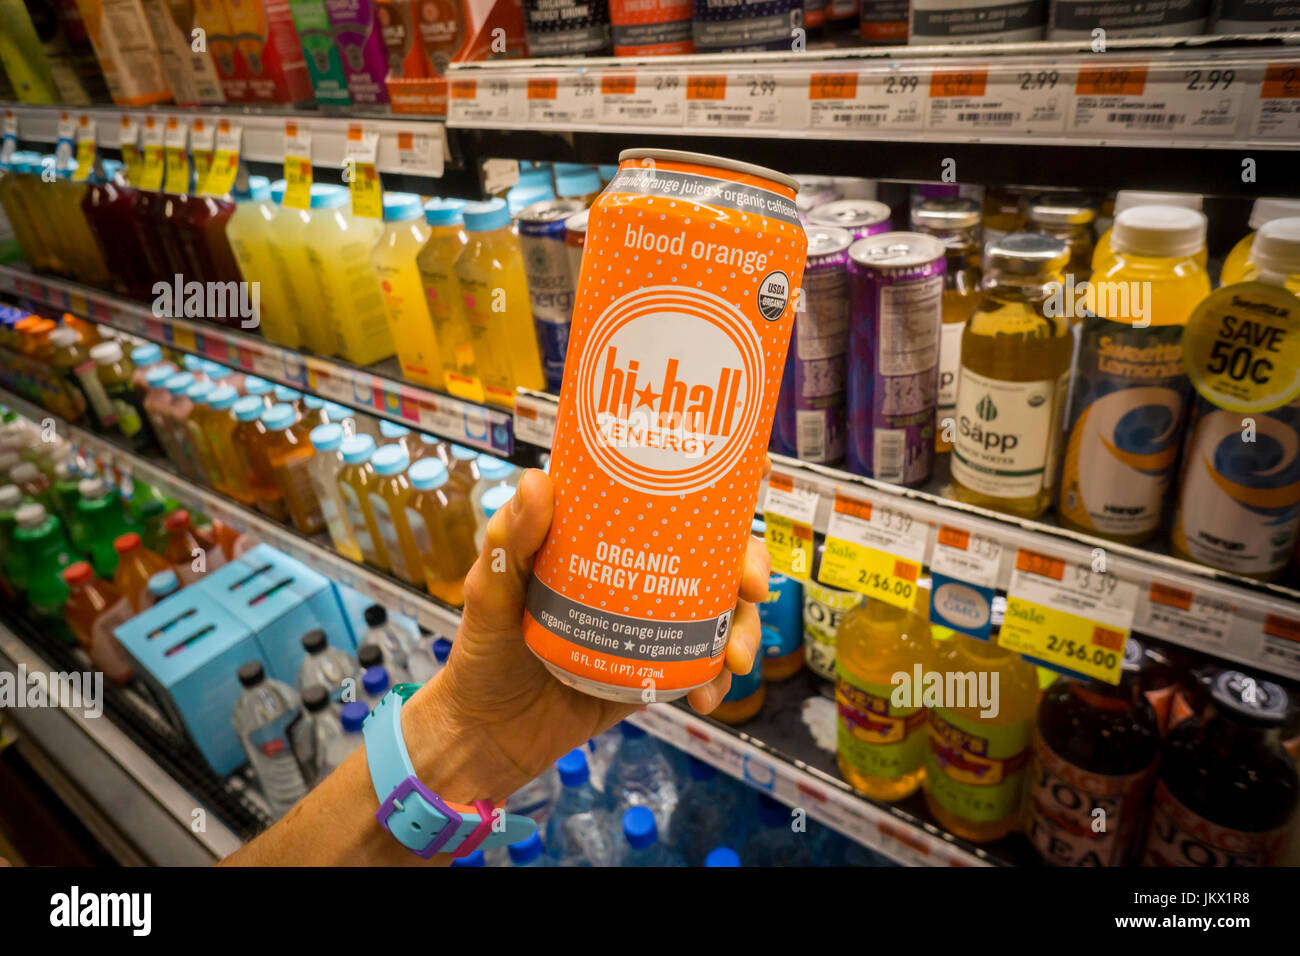 Cans of Hi-Ball energy drinks in a supermarket cooler in New York on Thursday, July 20, 2017. AB InBev (Anheuser-Busch) announced it will acquire Hiball Energy the maker of the organic Hi-Ball energy drinks and  Alta Palta sparkling beverages. As Americans move away from beers, such as Budweiser, Anheuser-Busch has been diversifying its portfolio of brands. (© Richard B. Levine) Stock Photo